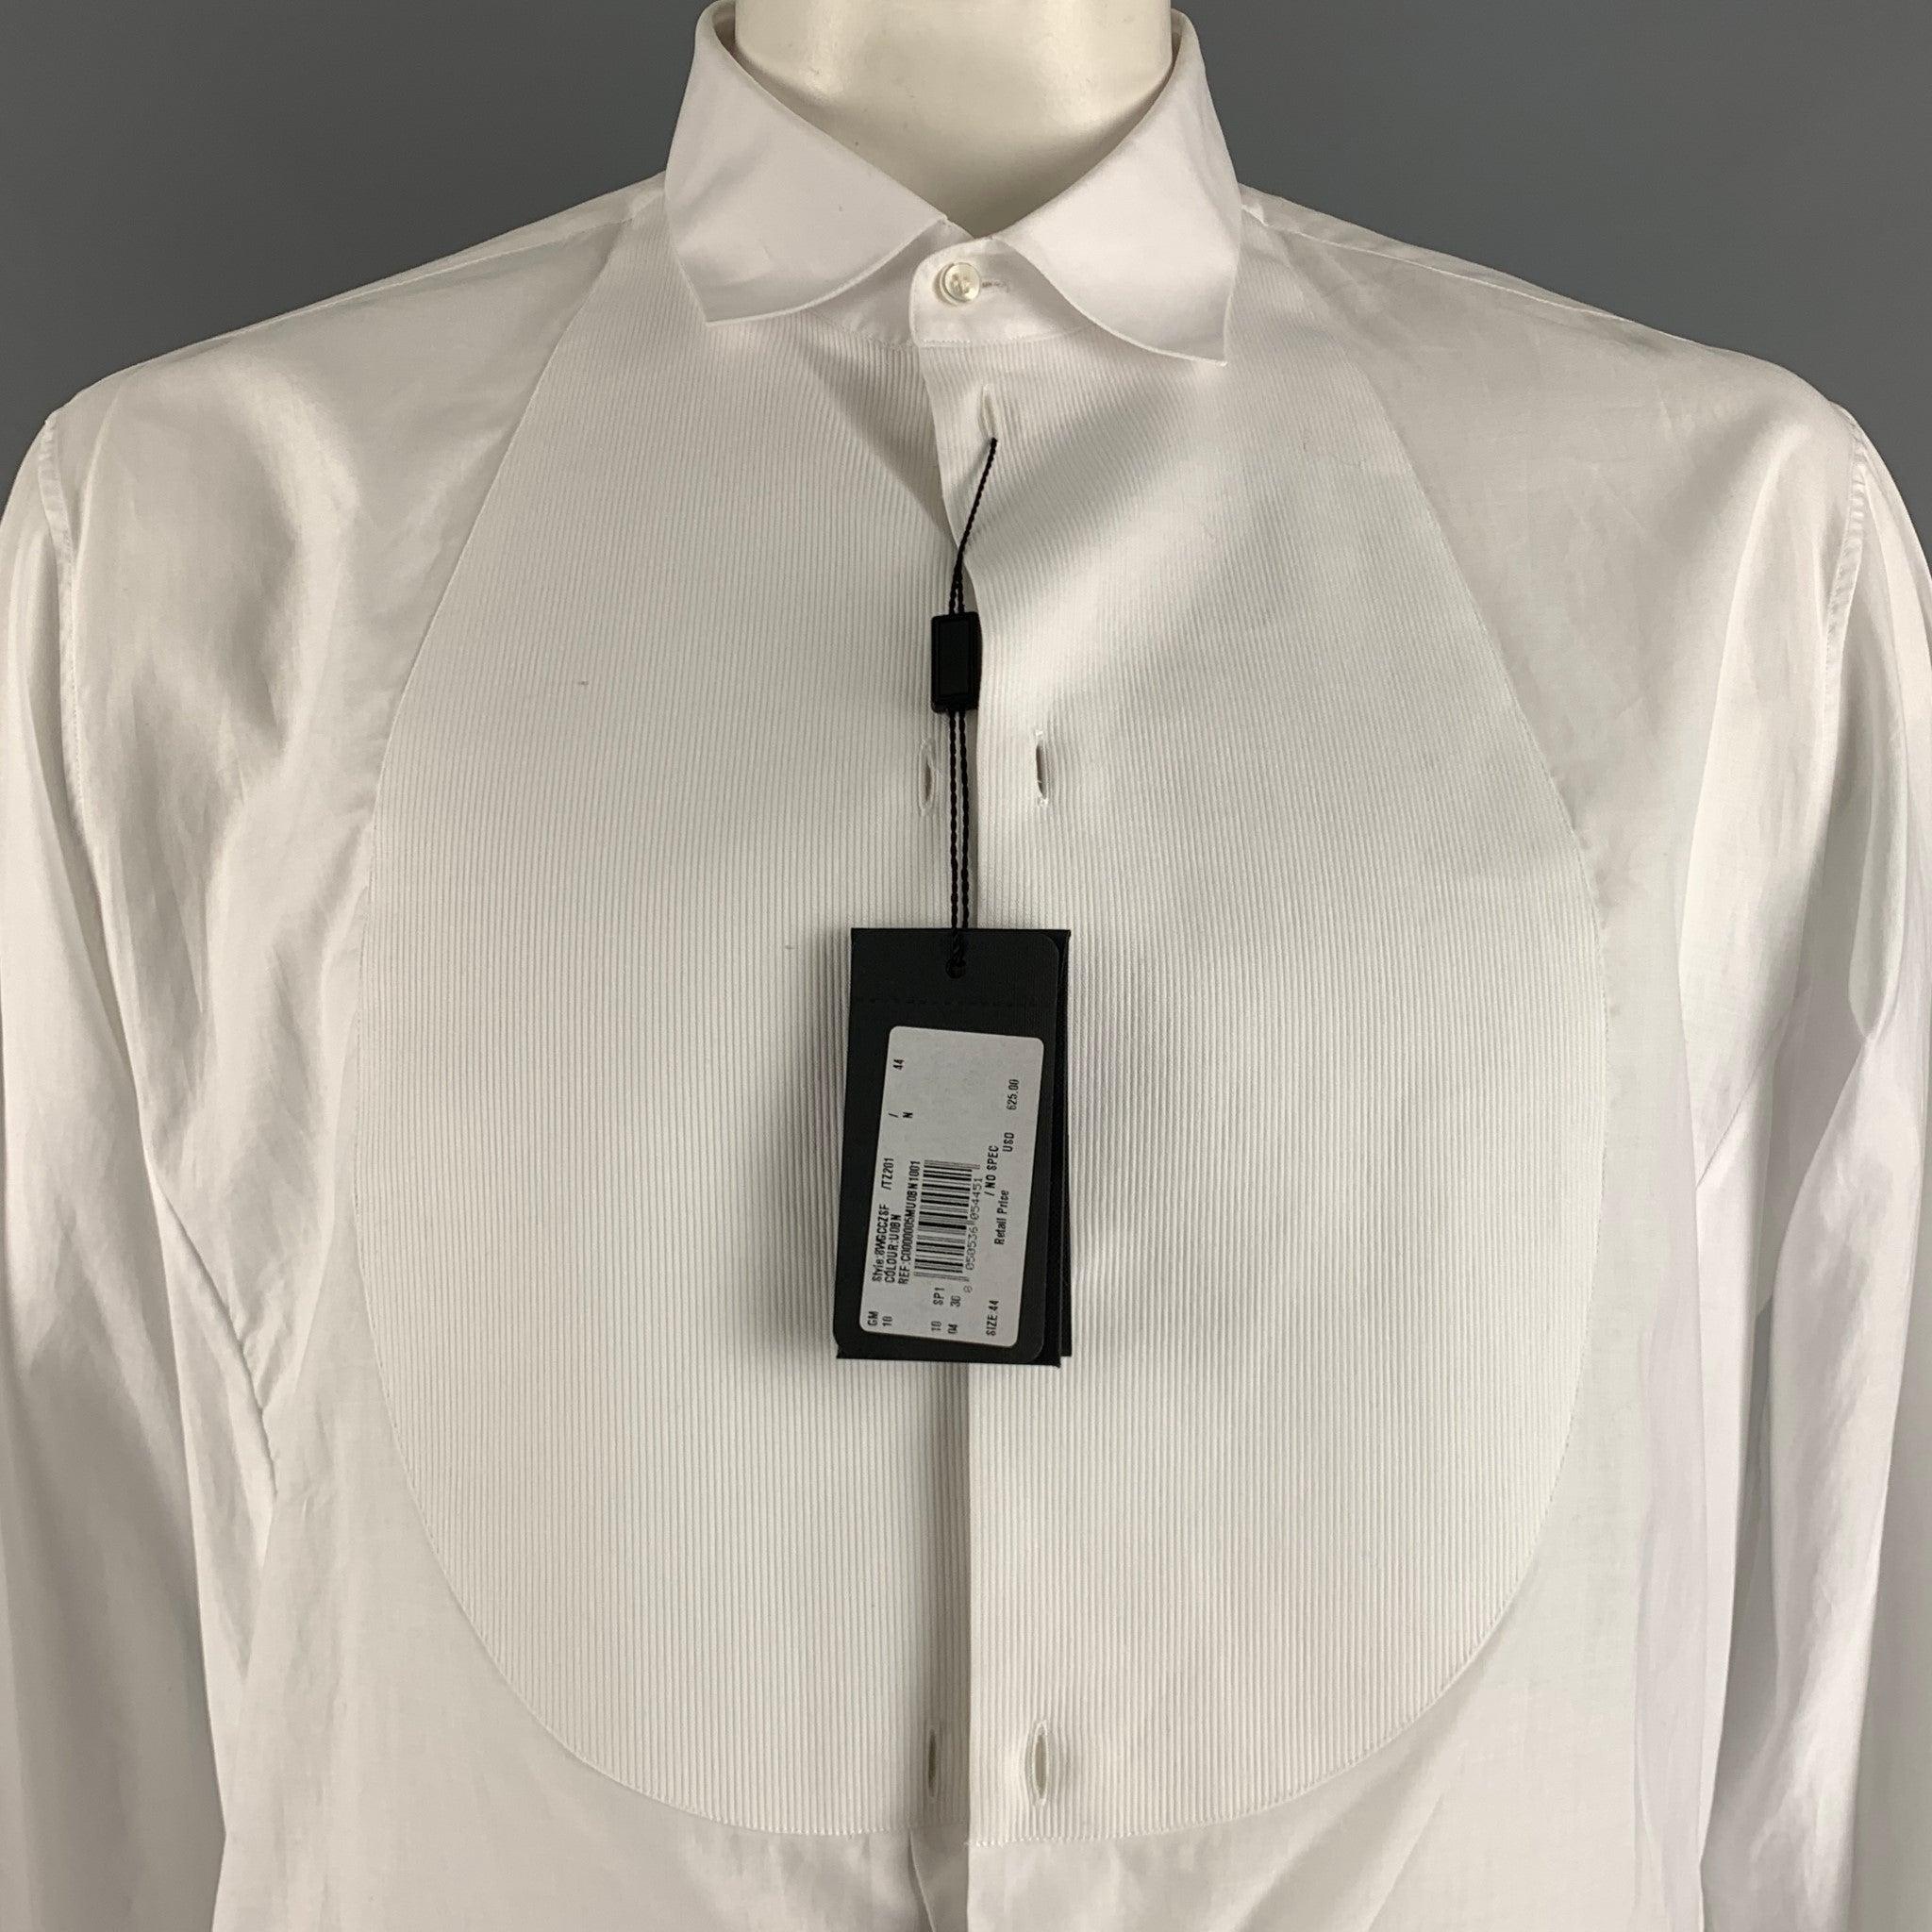 GIORGIO ARMANI long sleeve shirt comes in a white cotton featuring a tuxedo style, french cuffs, and a buttoned closure. Comes with tags. Made in Italy.
Very Good Pre-Owned Condition. Missing four tux buttons. 

Marked:   44/17.5 

Measurements: 
